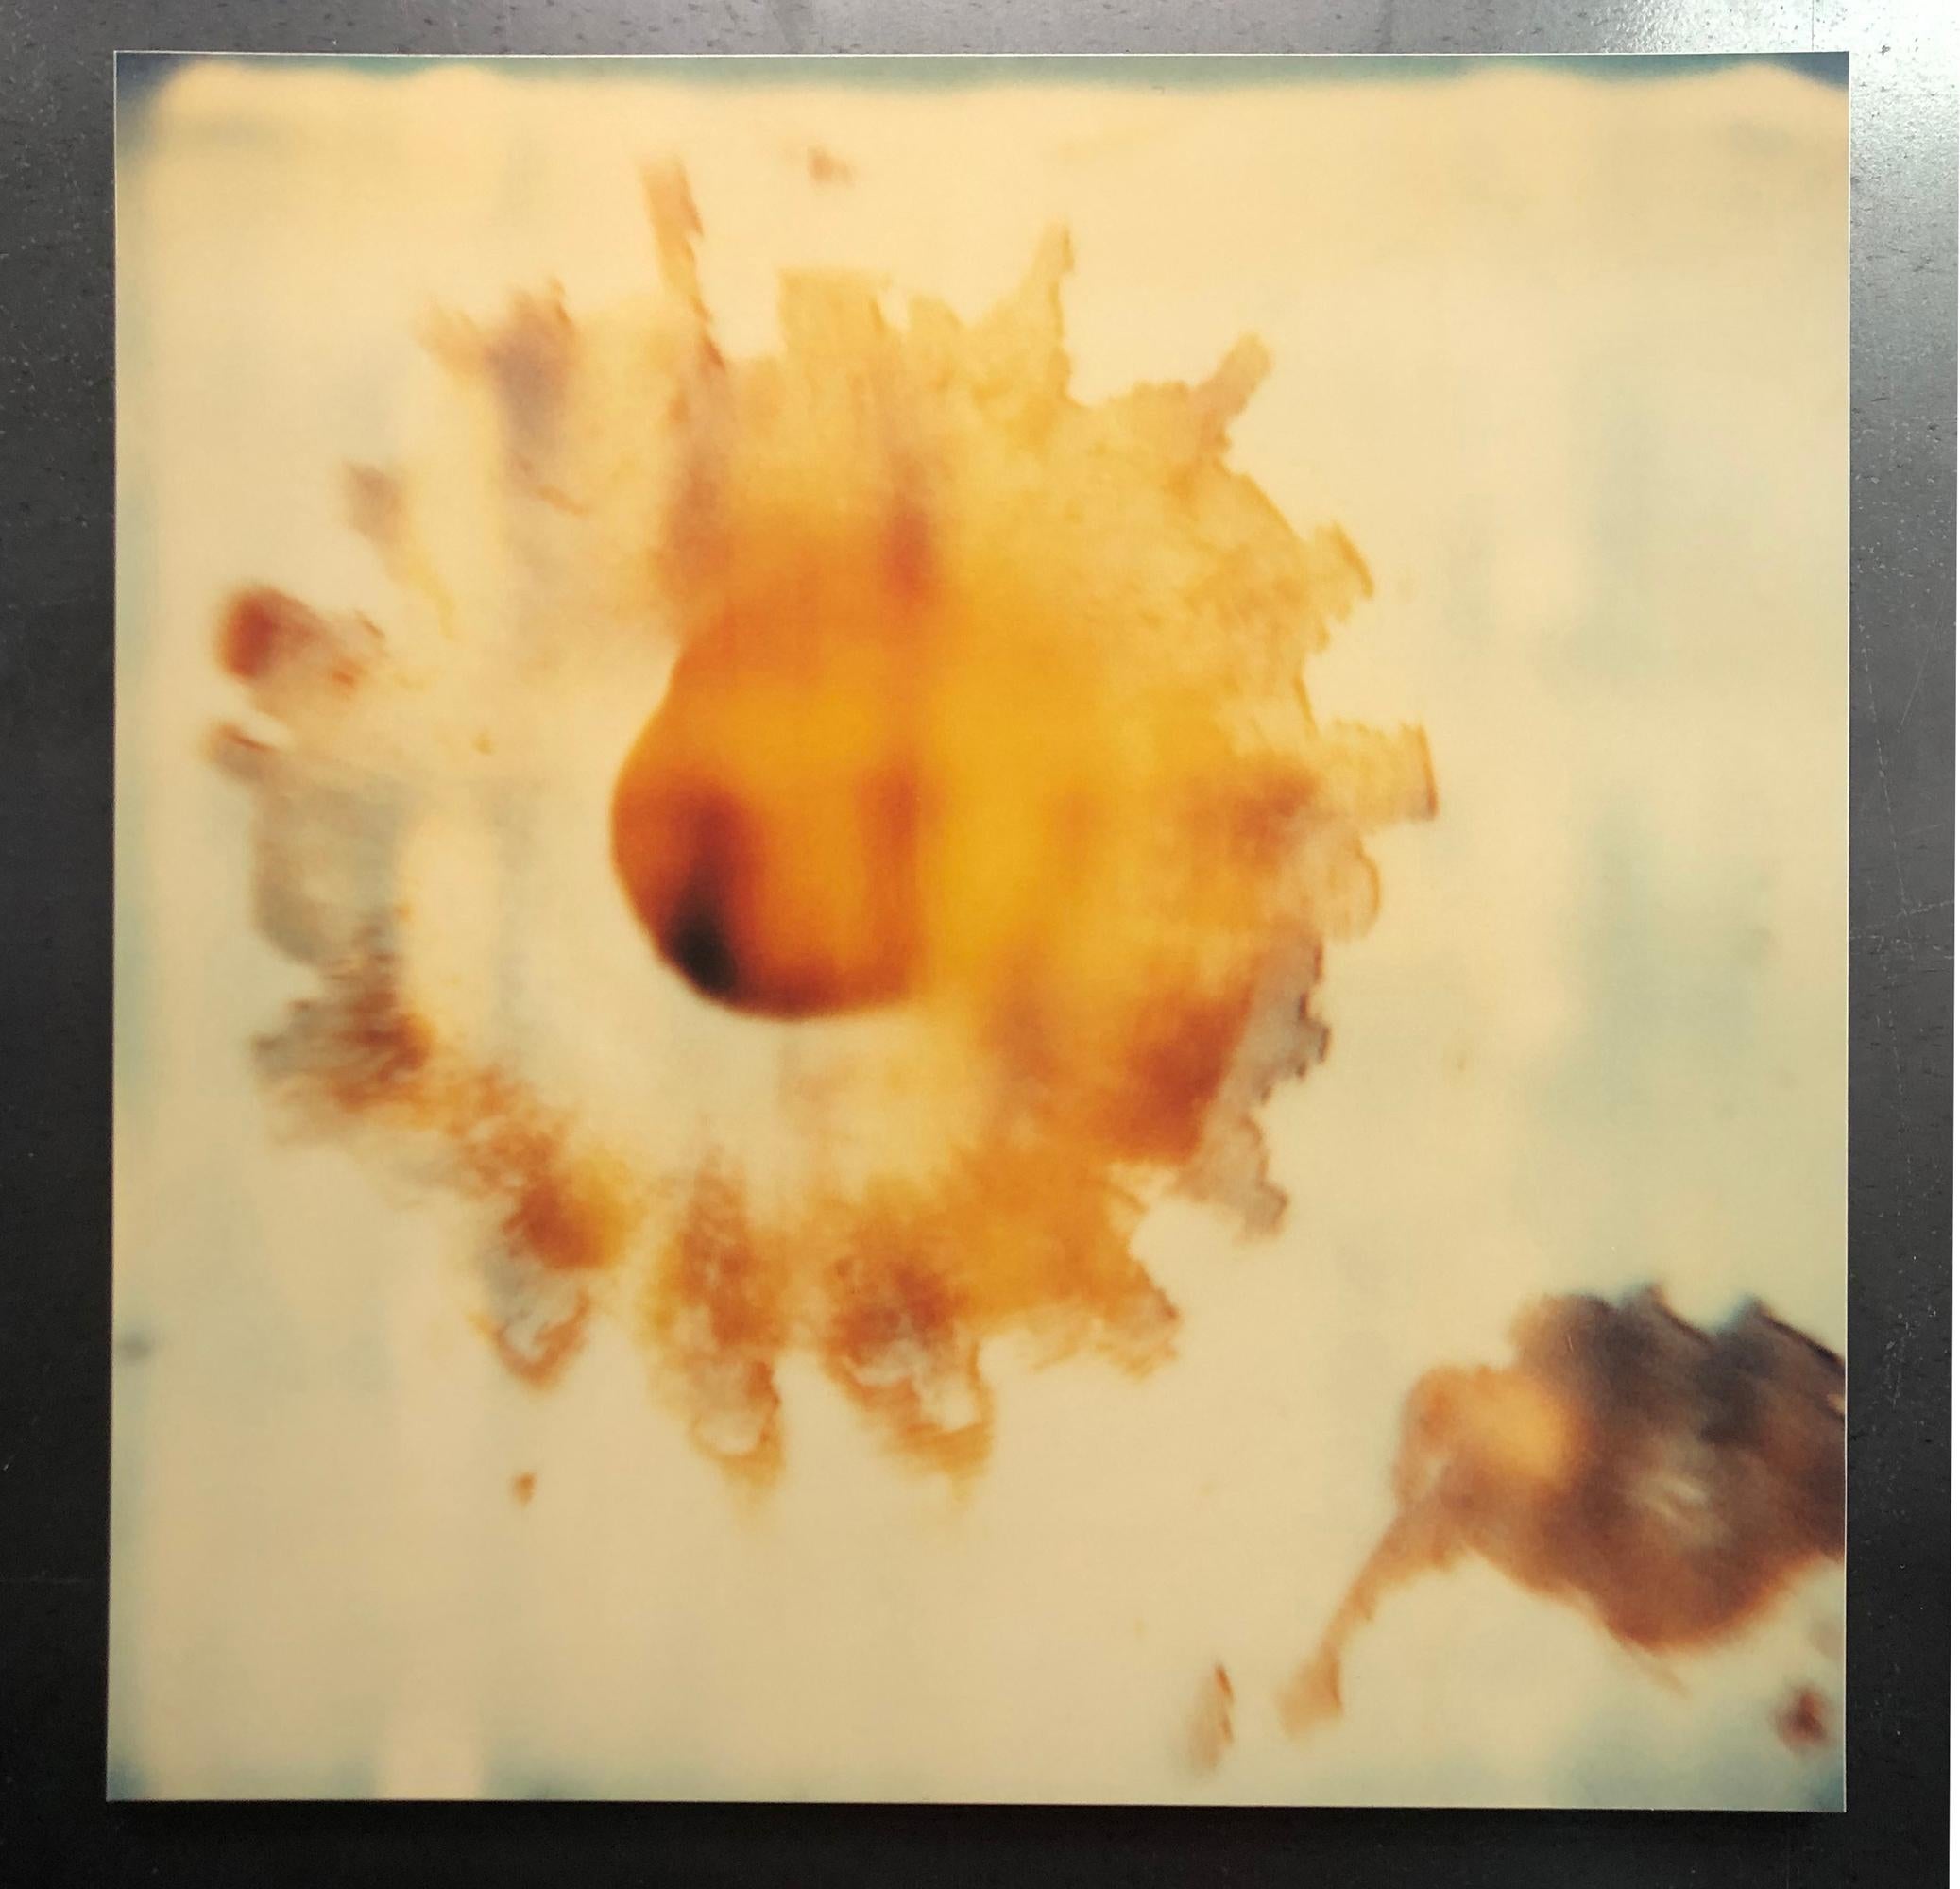 Impact (Wastelands) - Polaroid, Contemporary, Abstract, Analog, Mounted - Photograph by Stefanie Schneider